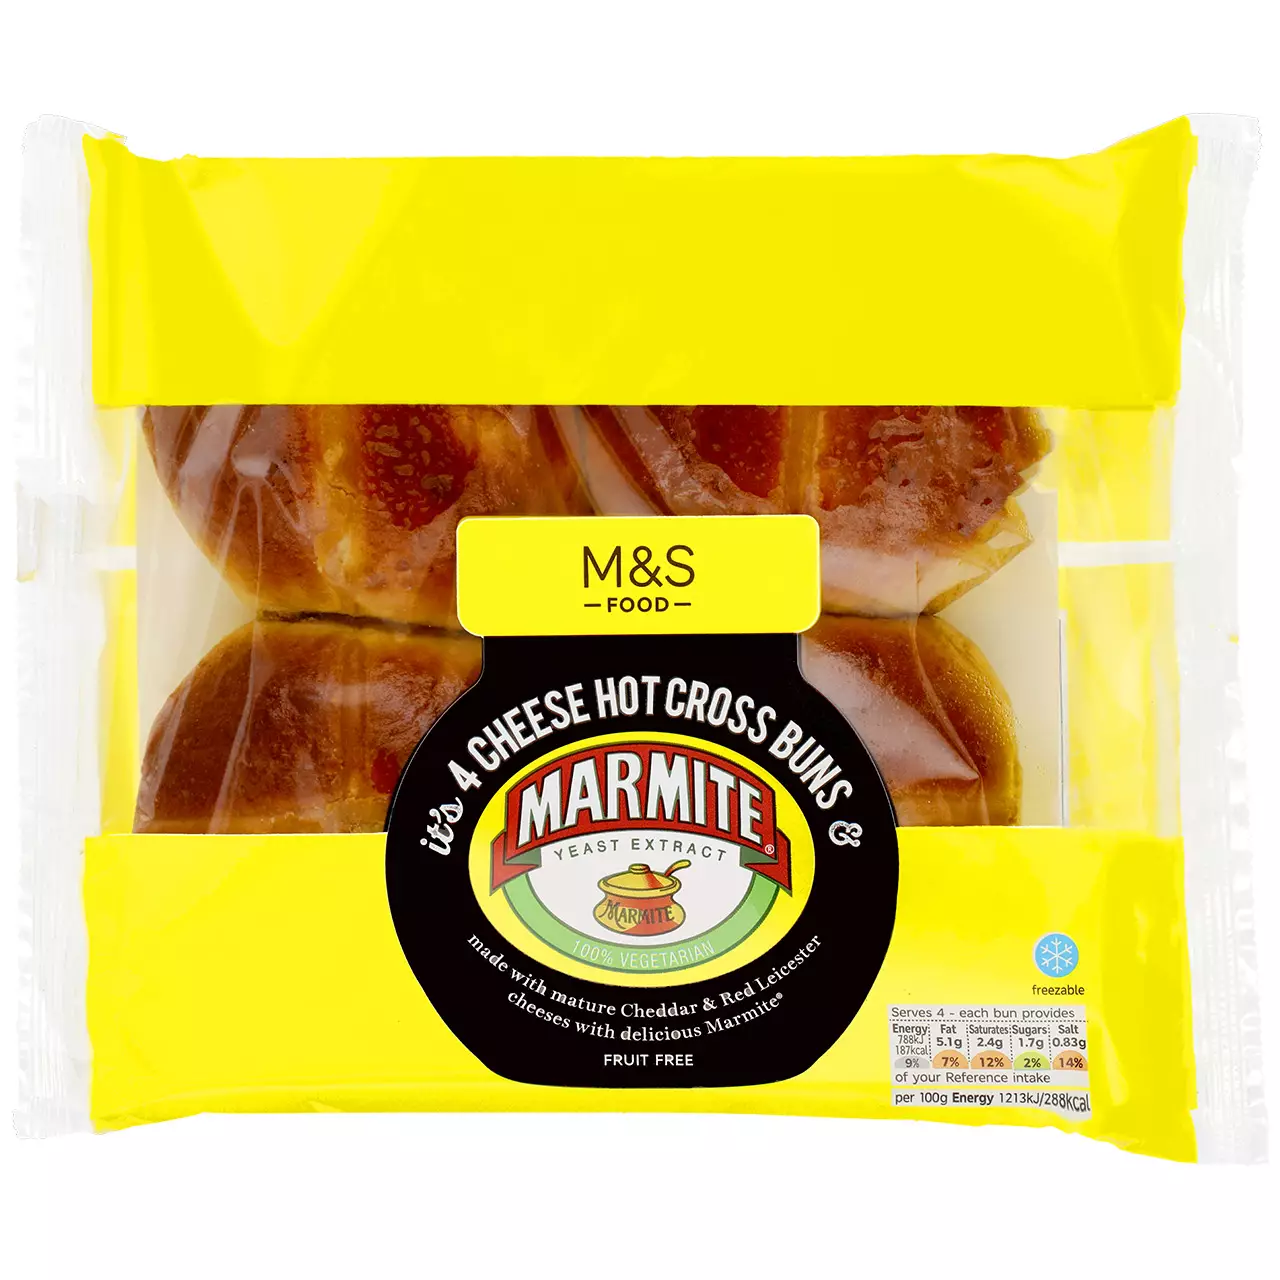 Take a look at the new M&S cheesy Marmite hot cross buns (